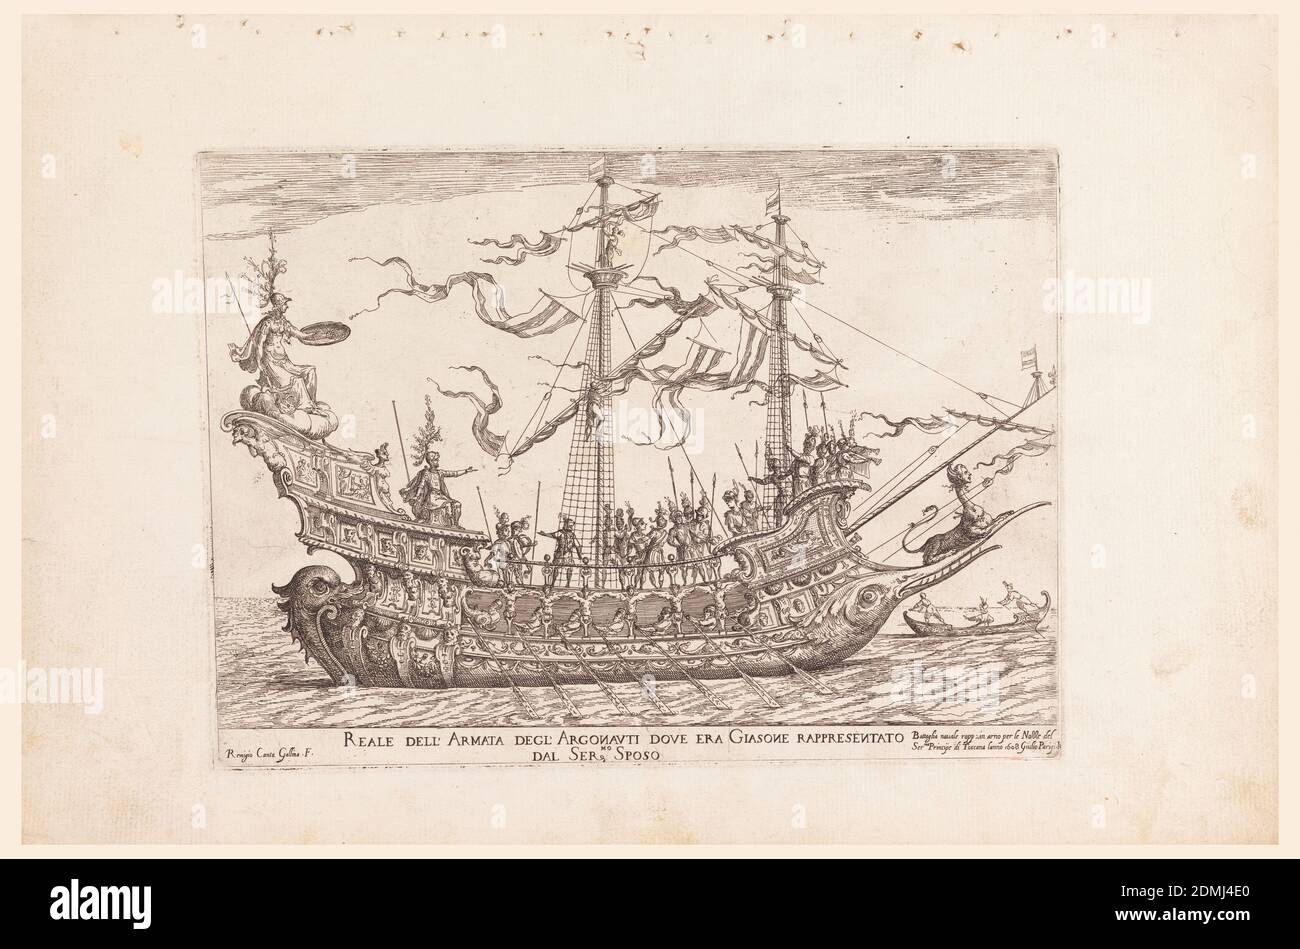 Reale dell'armata degl'Argonauti dove era Giasone rappresentato dal Ser. Sposo, from Vessels of the Argonauts for the wedding celebration of Cosimo de' Medici in 1608, plate 7, Remigio Cantagallina, Italian, ca. 1582–1656, Giulio Parigi, Italian, 1571–1635, etching on laid paper, The ship of Cosimo de' Medici. An elaborately decorated ship in profile moving from left to right with many banners raised. Soldiers stand on the deck of the ship as well as Jason, wearing a large helmet and seated towards the left. A goddess figure sits behind Jason in the rear of the ship holding a spear and shield Stock Photo